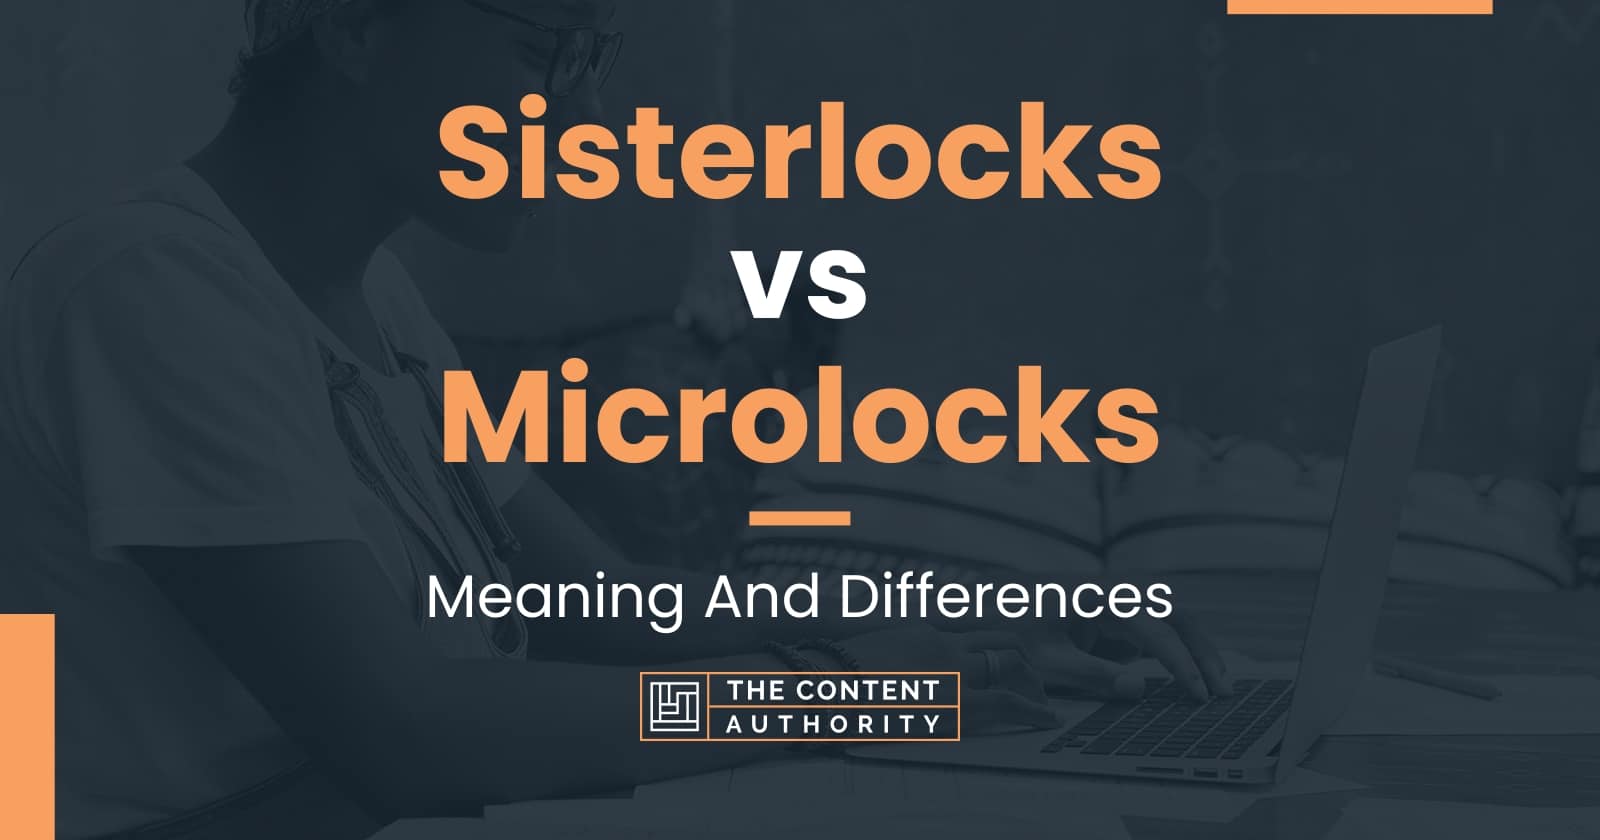 Sisterlocks vs Microlocks: Meaning And Differences